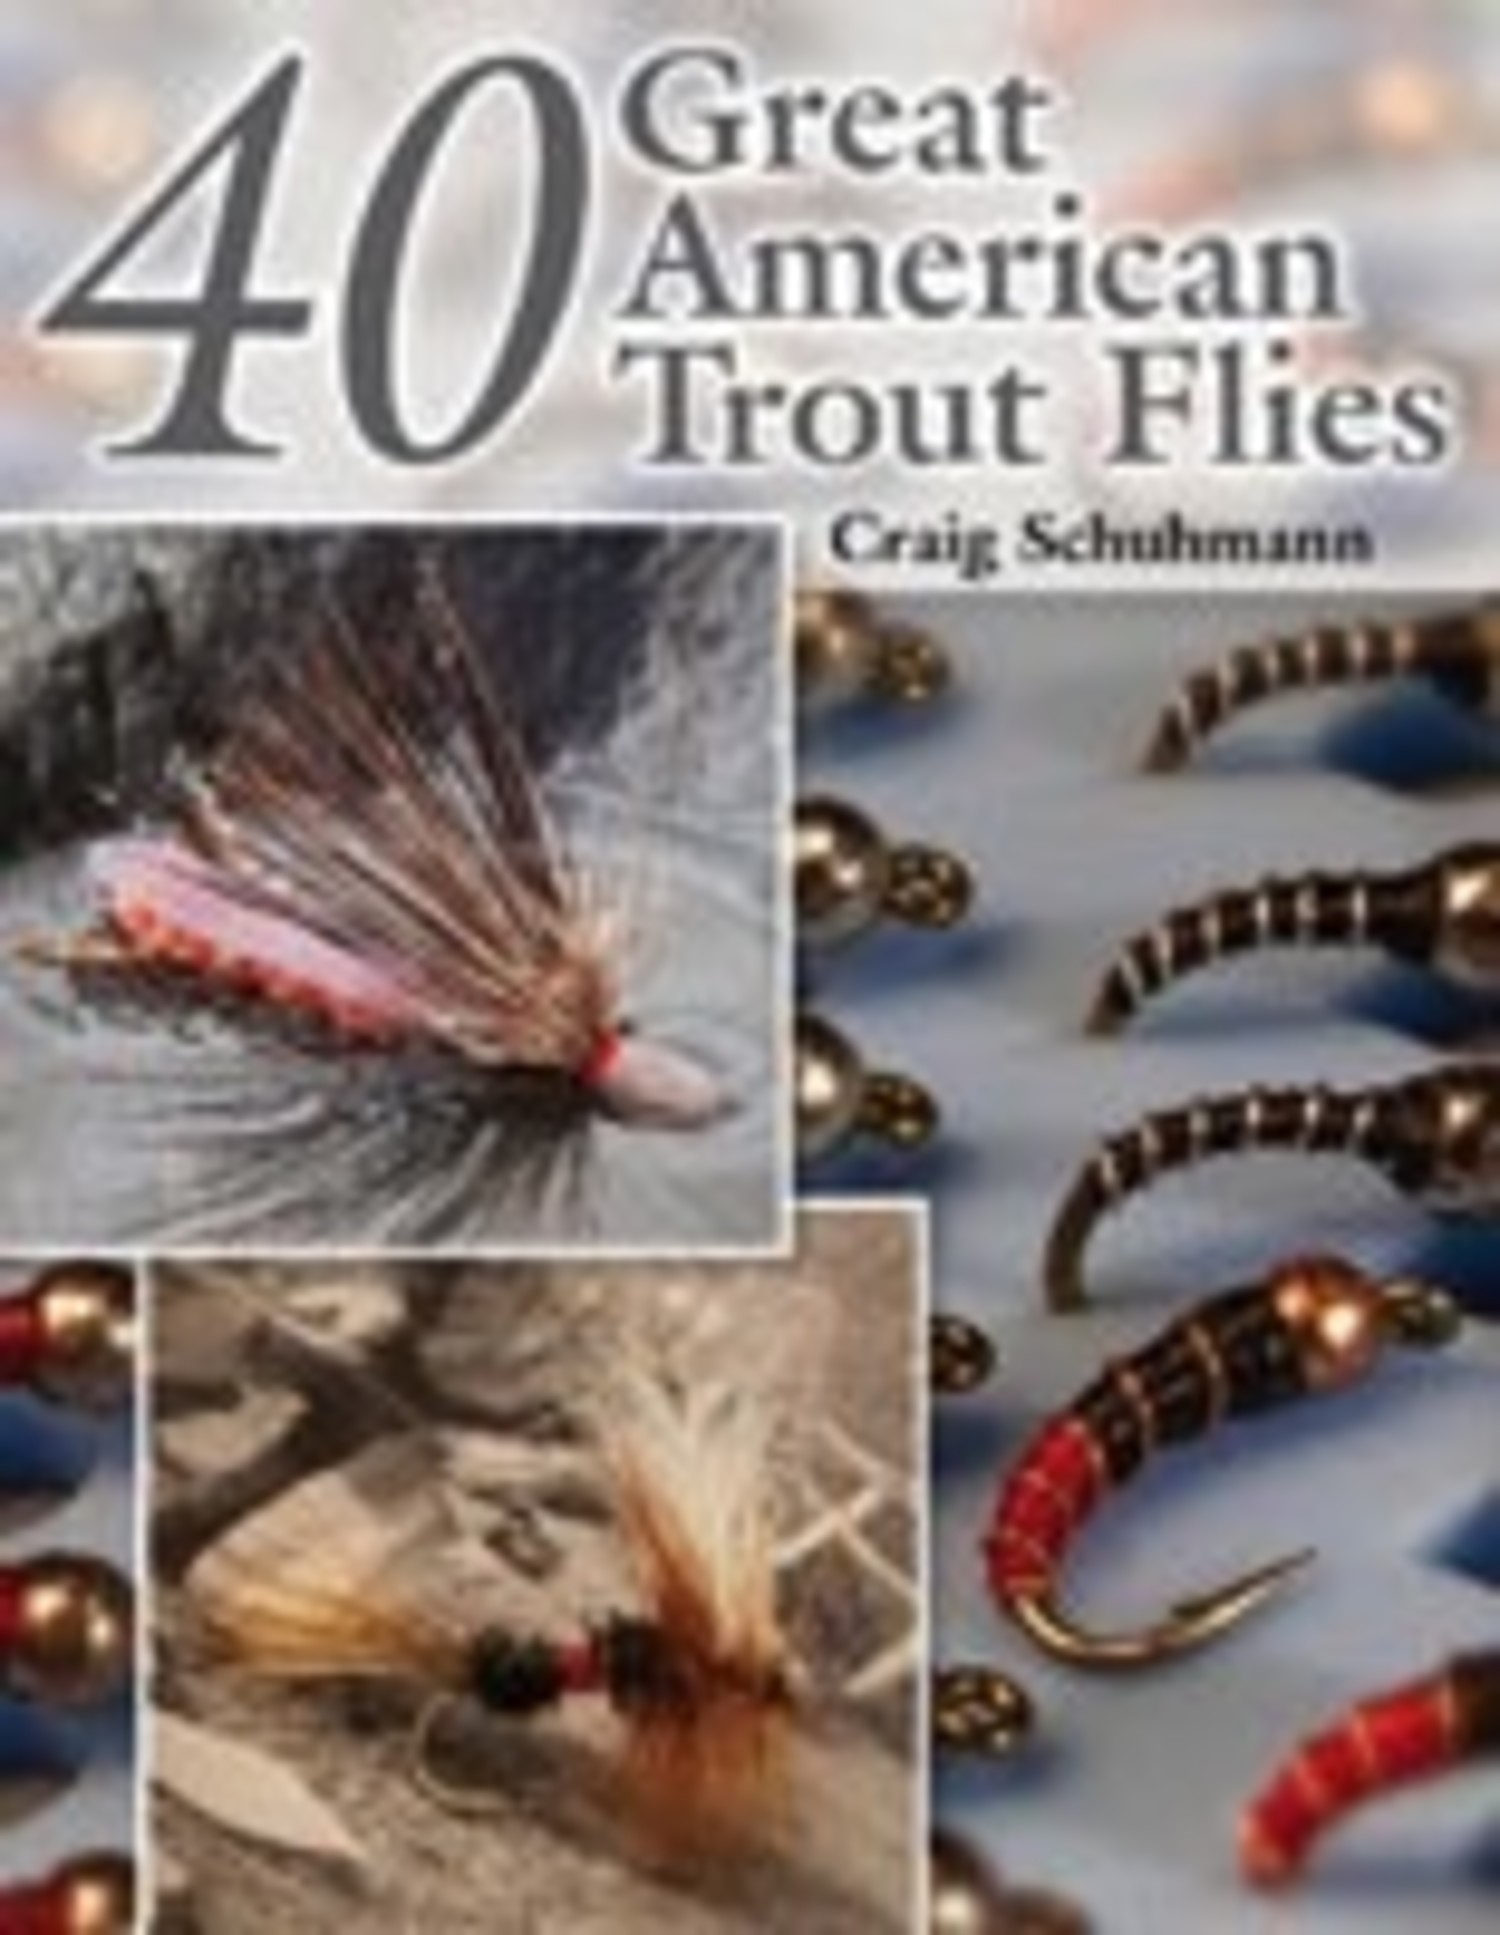 Anglers Books 40 Great American Trout Flies